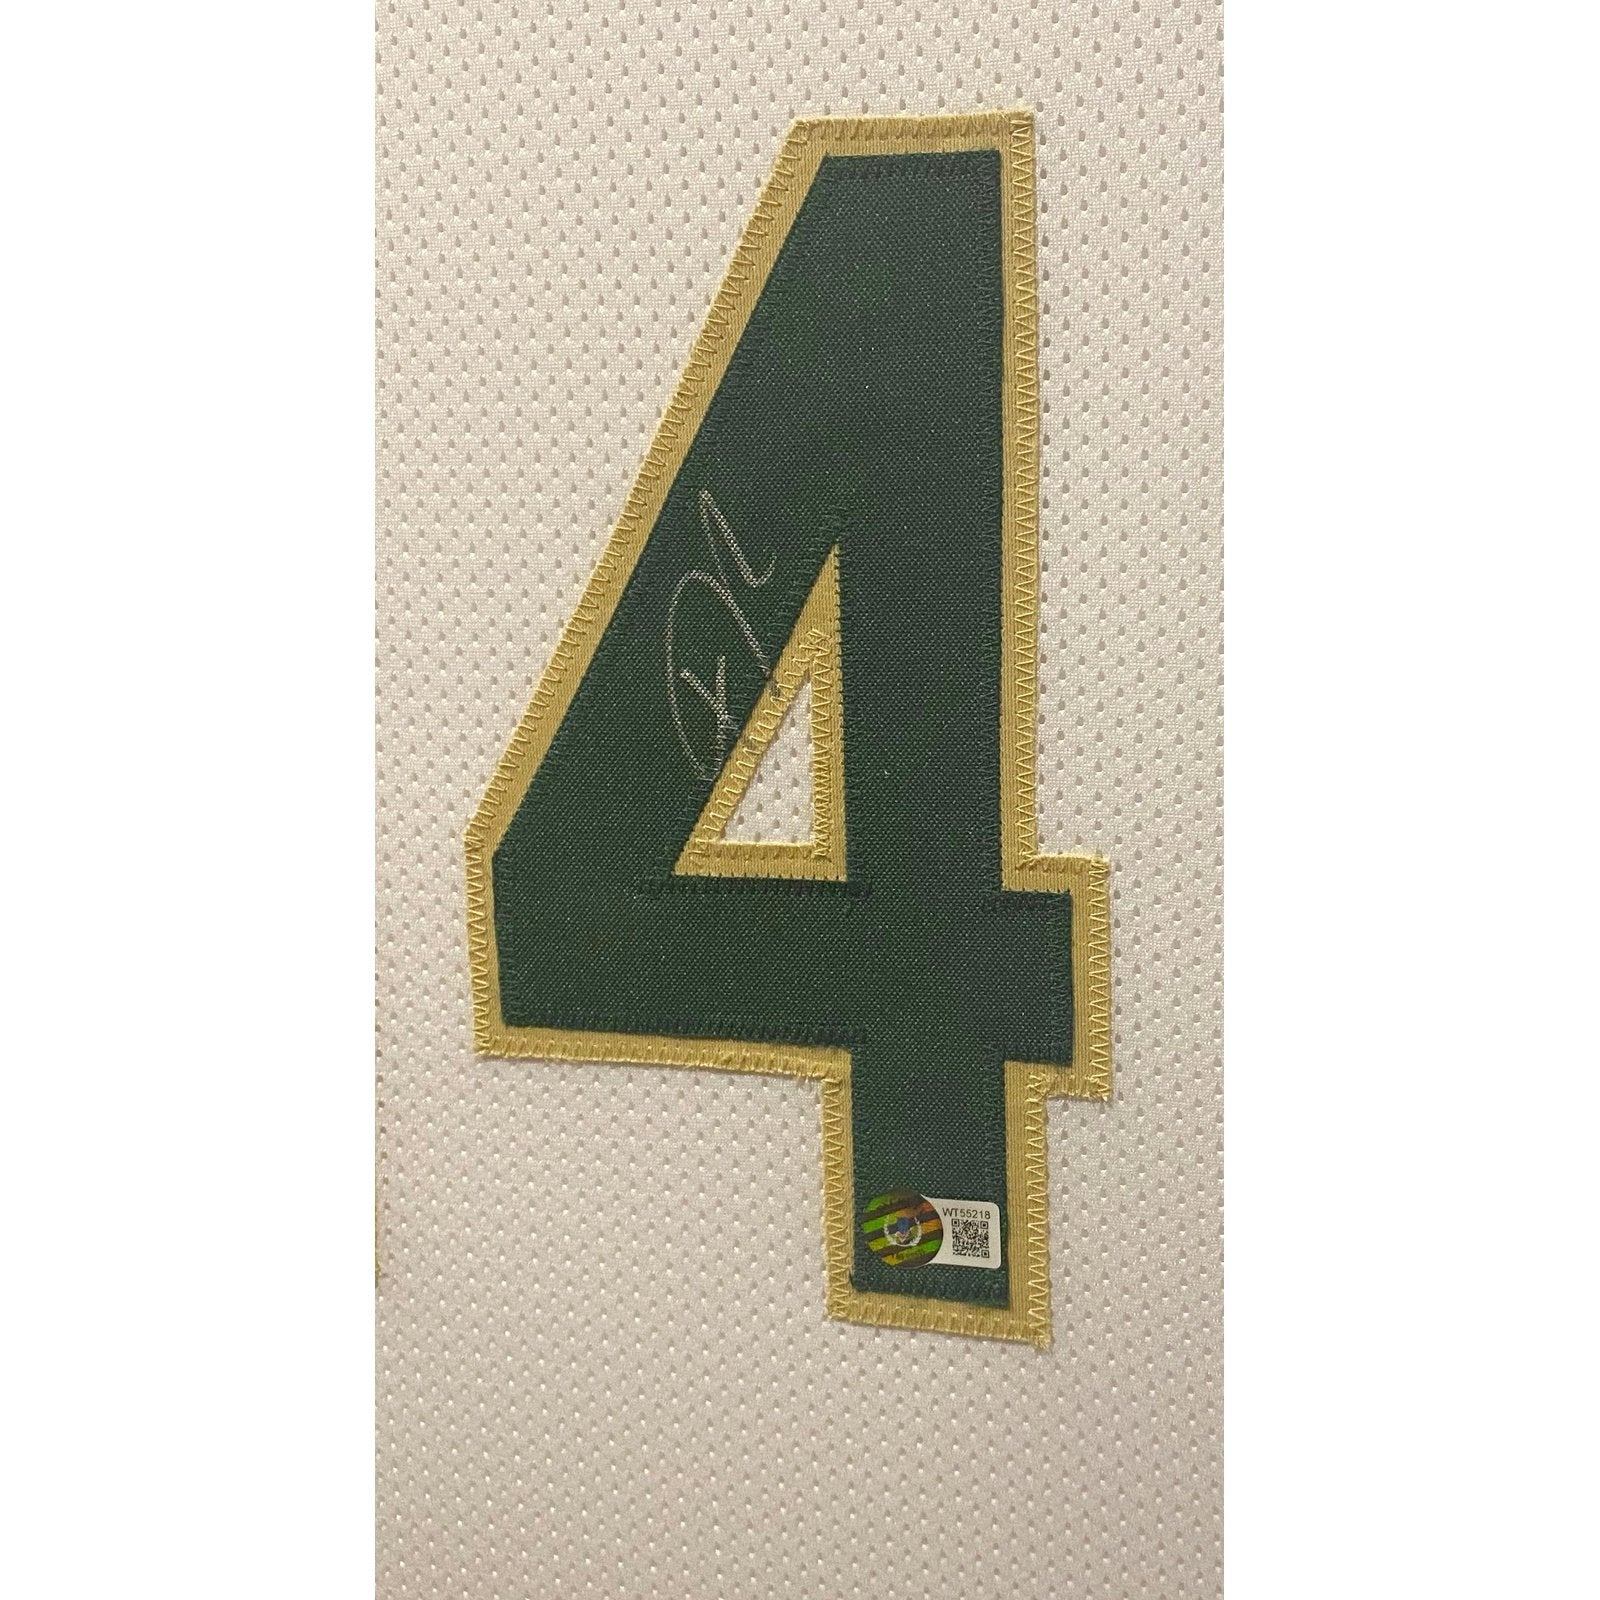 Giannis Antetokounmpo Framed Signed Jersey Beckett Autographed Milwauk